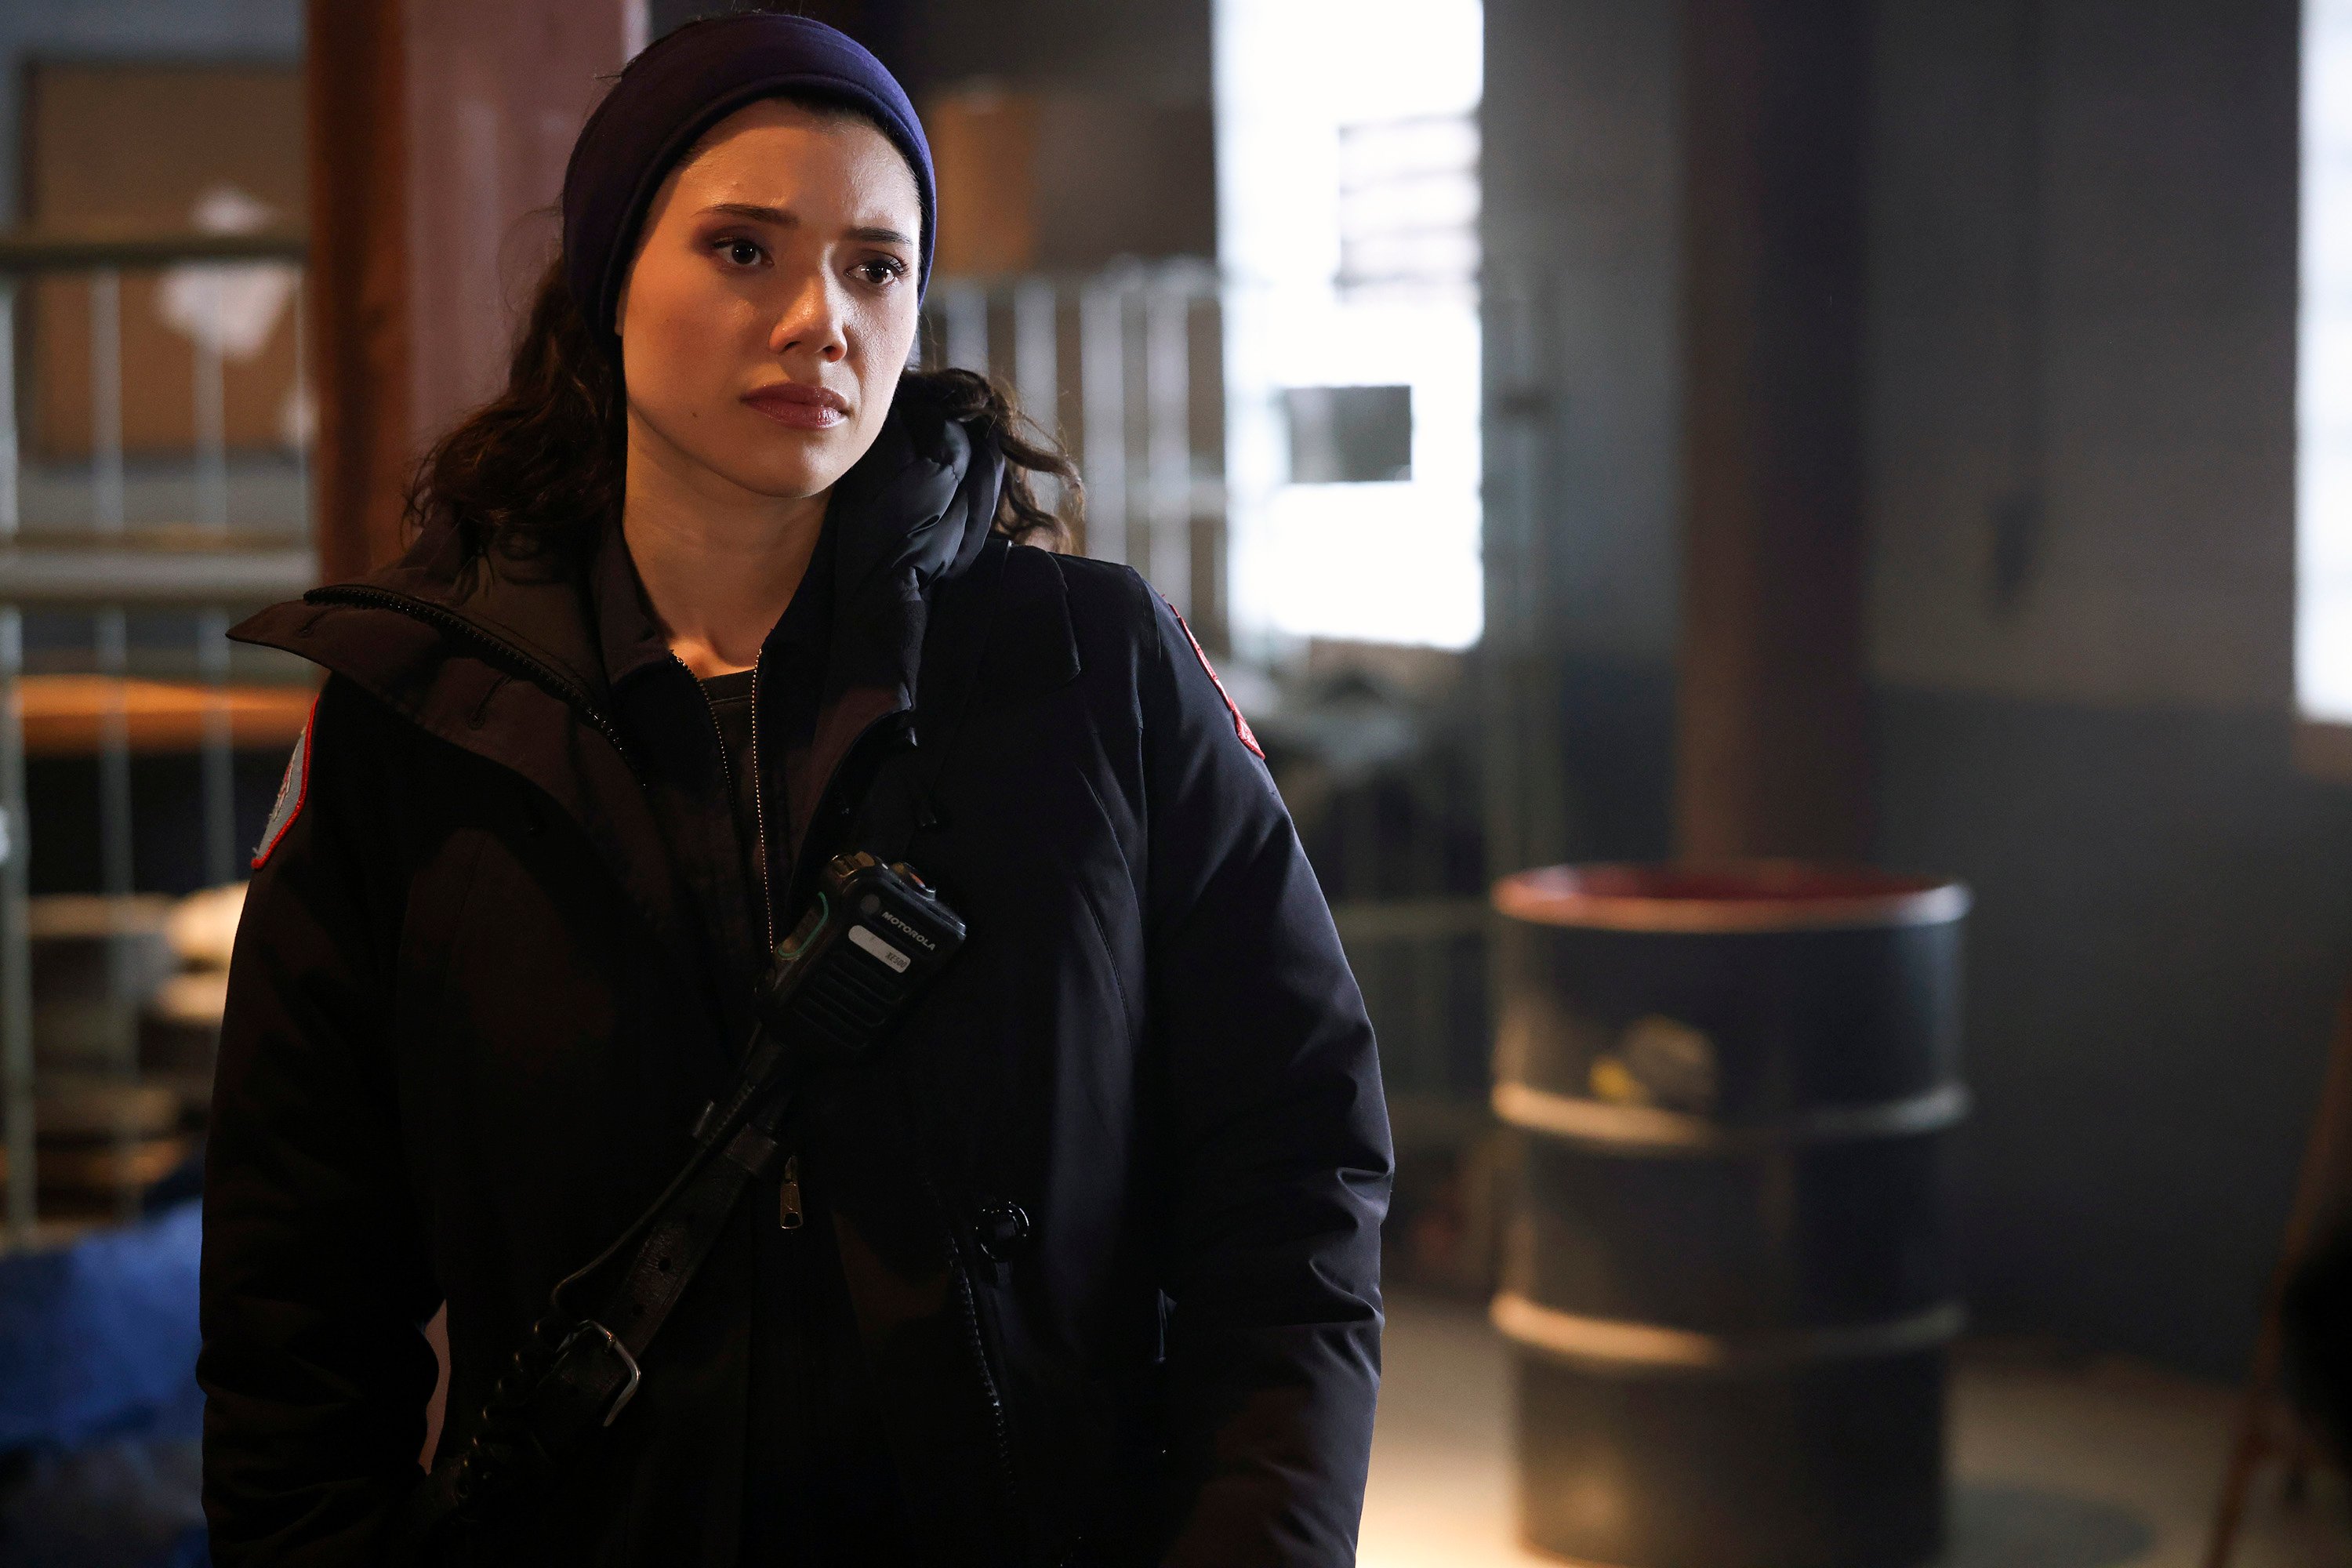 Hanako Greensmith as Violet Mikami on Chicago Fire.